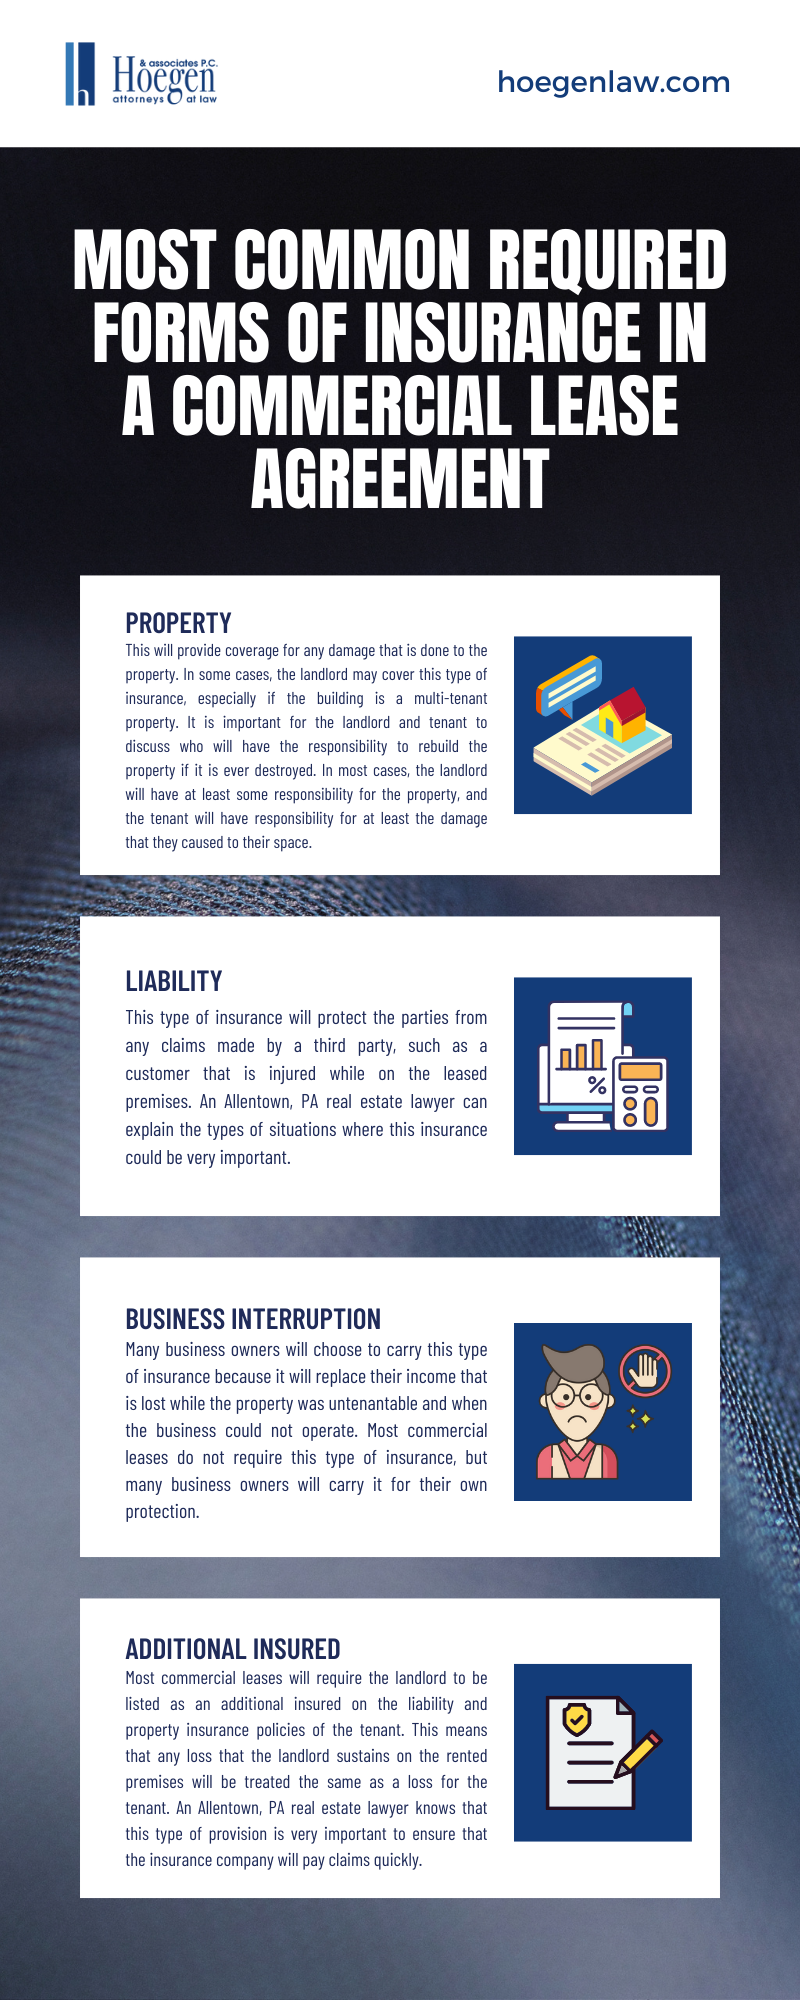 Most Common Required Forms of Insurance In A Commercial Lease Agreement Infographic